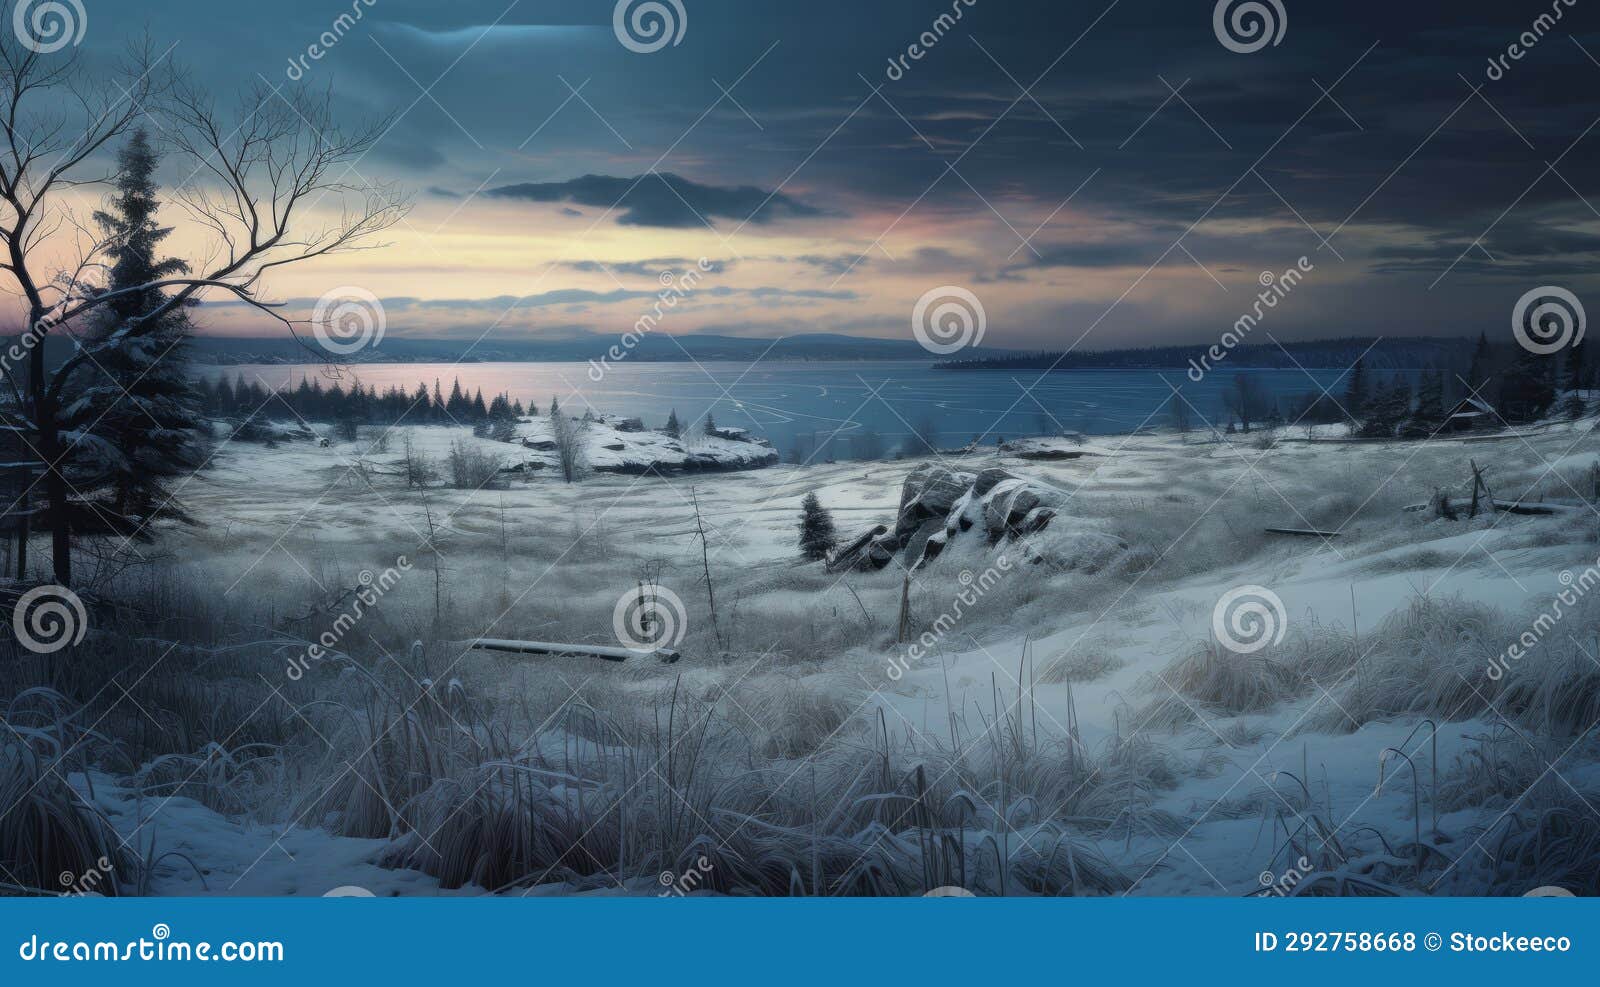 hd landscape wallpapers by jared: delicately rendered winter scenes in quebec province